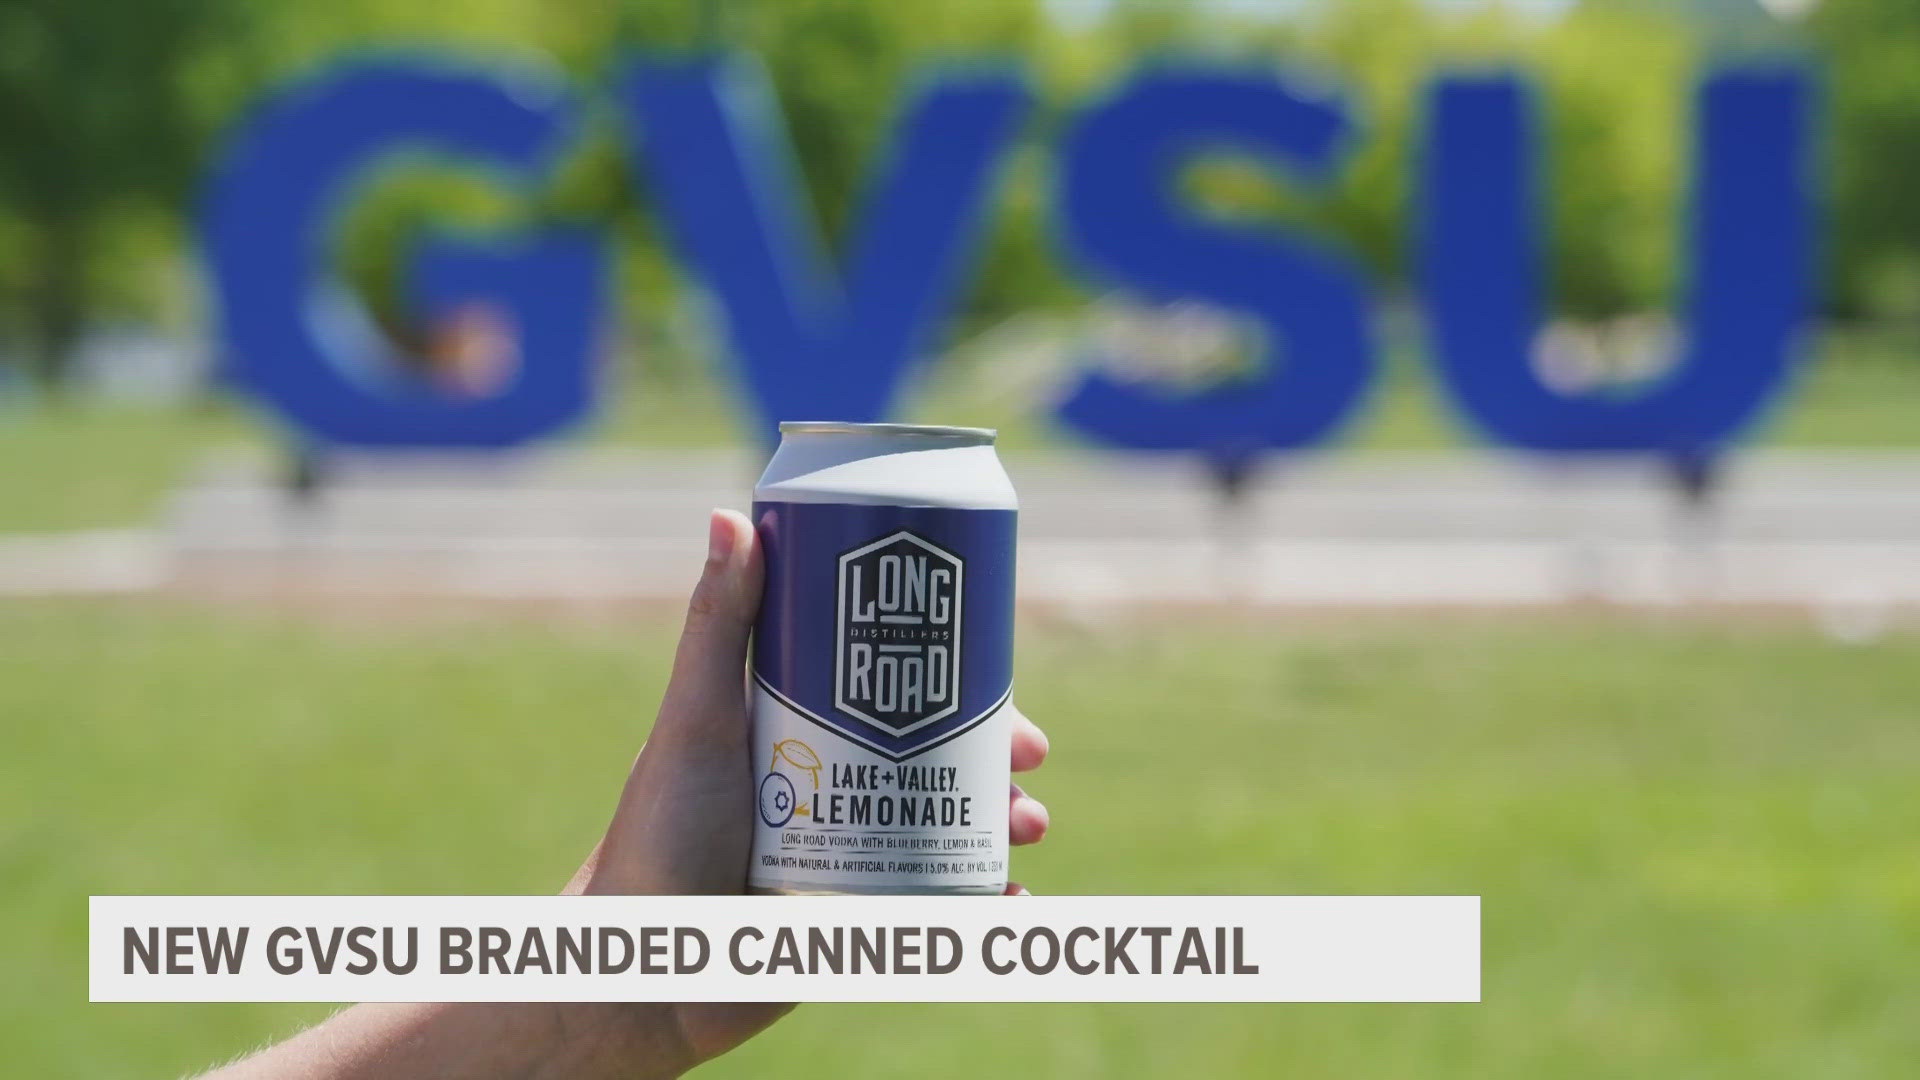 Grand Valley State University has partnered with a local distiller to make a GVSU branded canned cocktail.